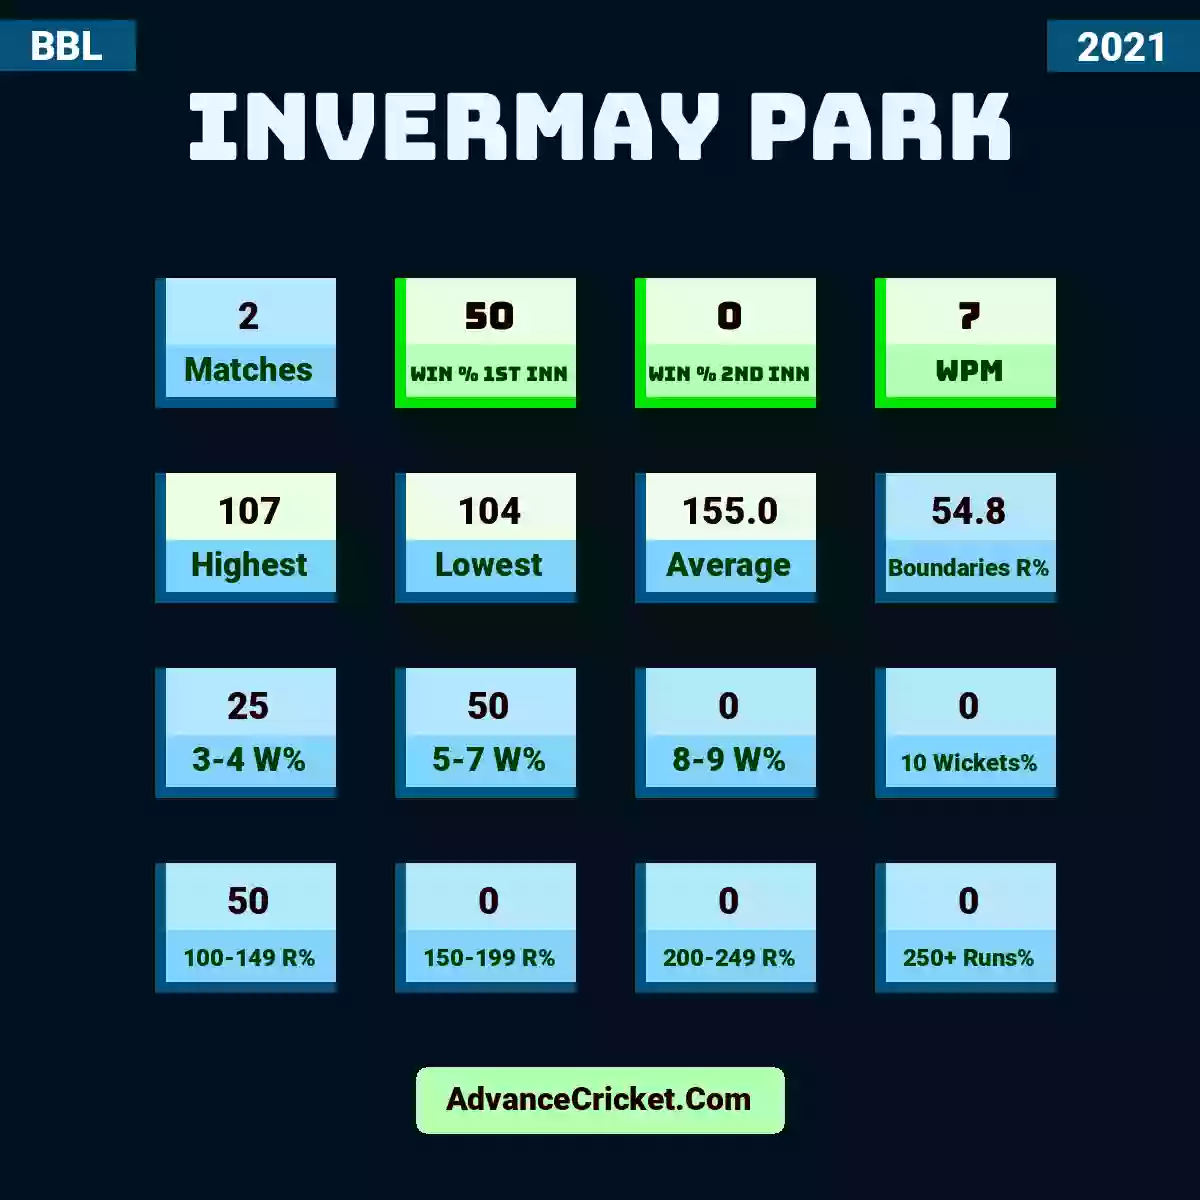 Image showing Invermay Park with Matches: 2, Win % 1st Inn: 50, Win % 2nd Inn: 0, WPM: 7, Highest: 107, Lowest: 104, Average: 155.0, Boundaries R%: 54.8, 3-4 W%: 25, 5-7 W%: 50, 8-9 W%: 0, 10 Wickets%: 0, 100-149 R%: 50, 150-199 R%: 0, 200-249 R%: 0, 250+ Runs%: 0.